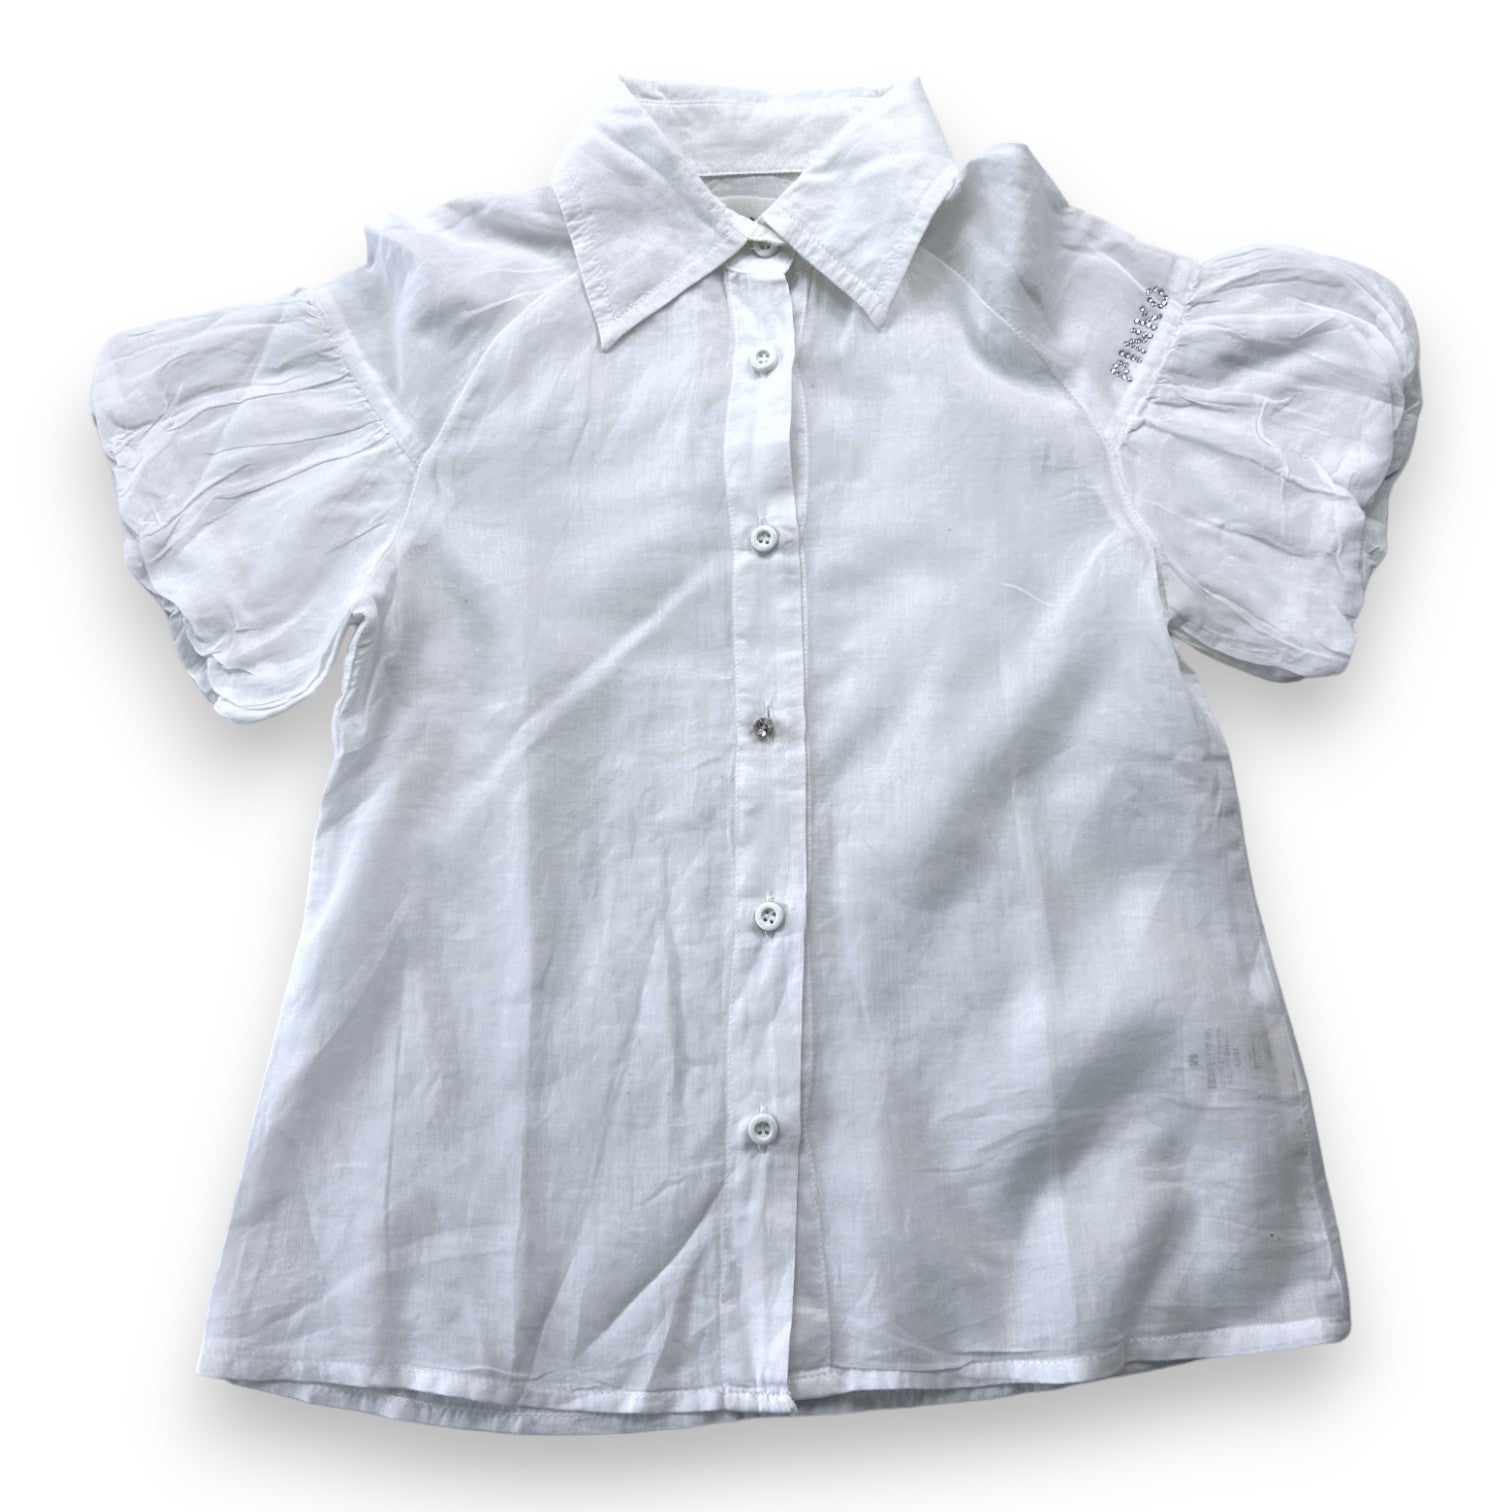 PINKO - Chemise blanche manches bouffantes  - 6 ans